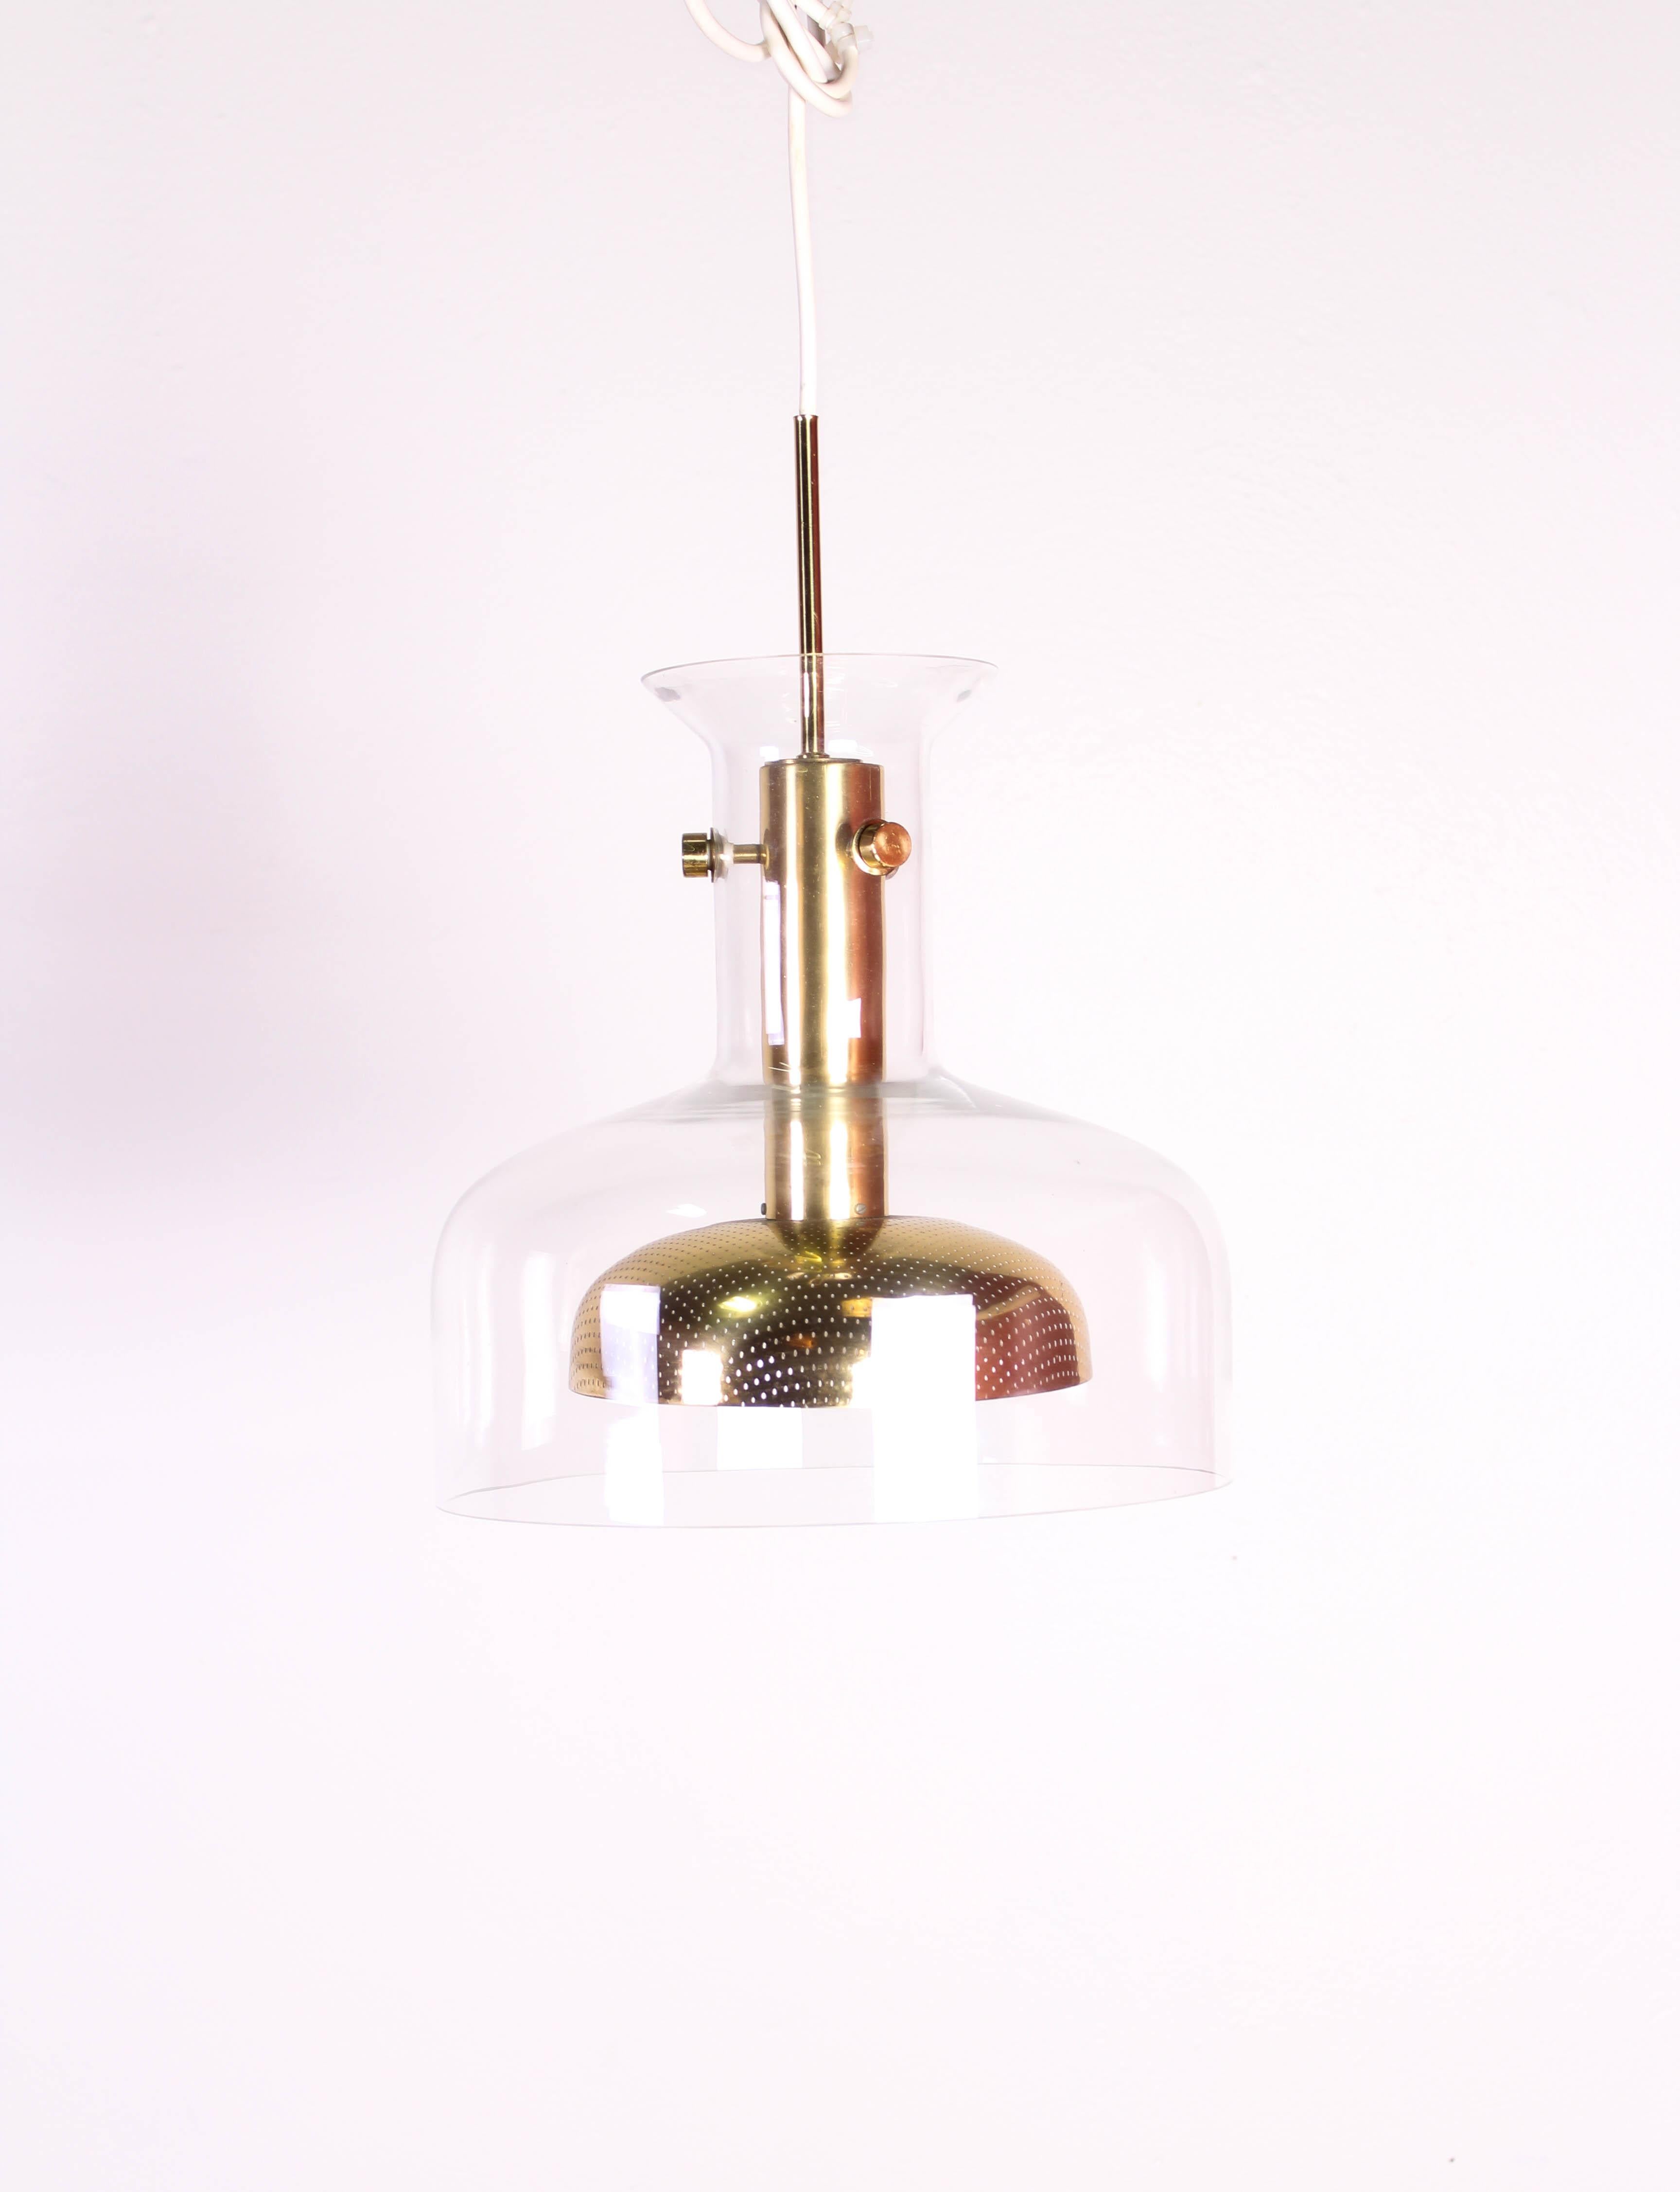 Midcentury ceiling lamp designed by Anders Pehrson for Ateljé Lyktan, Sweden. The lamp is made out of brass and glass with working wiring. The brass has some patina on it, see pictures but the overall condition of this rare lamp is very good.